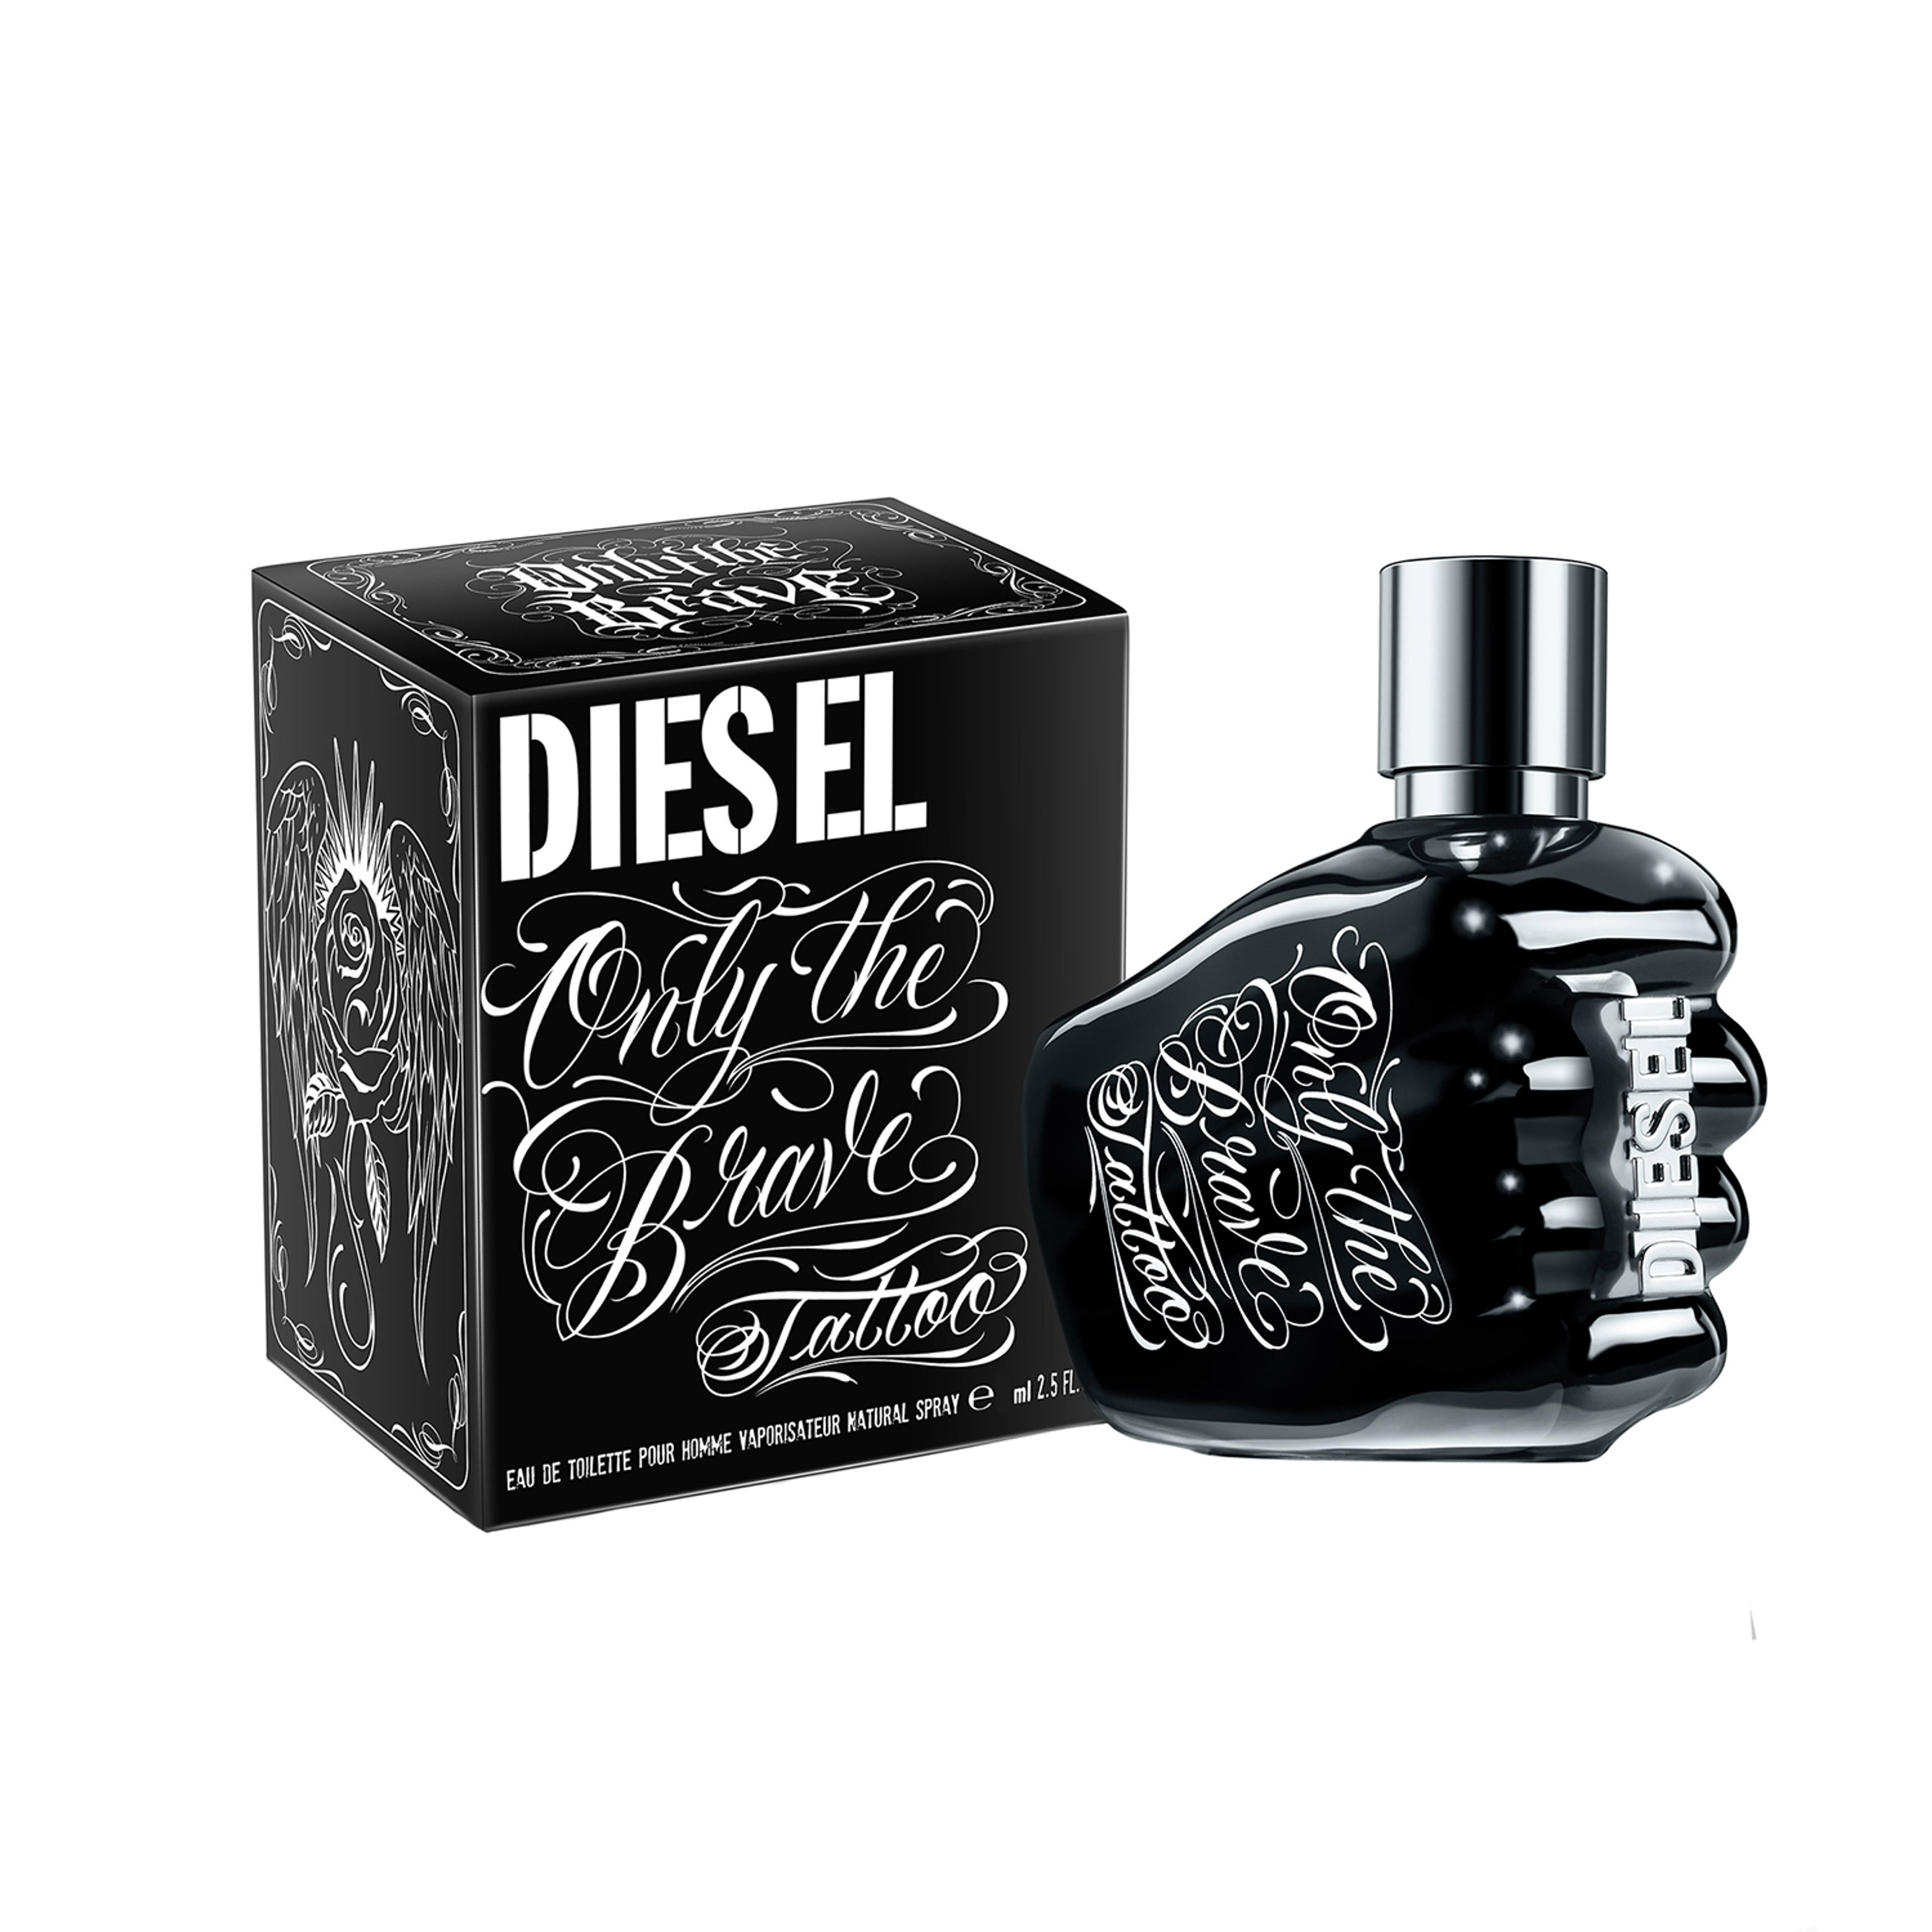 Diesel Only The Brave Tattoo Pour Homme 2